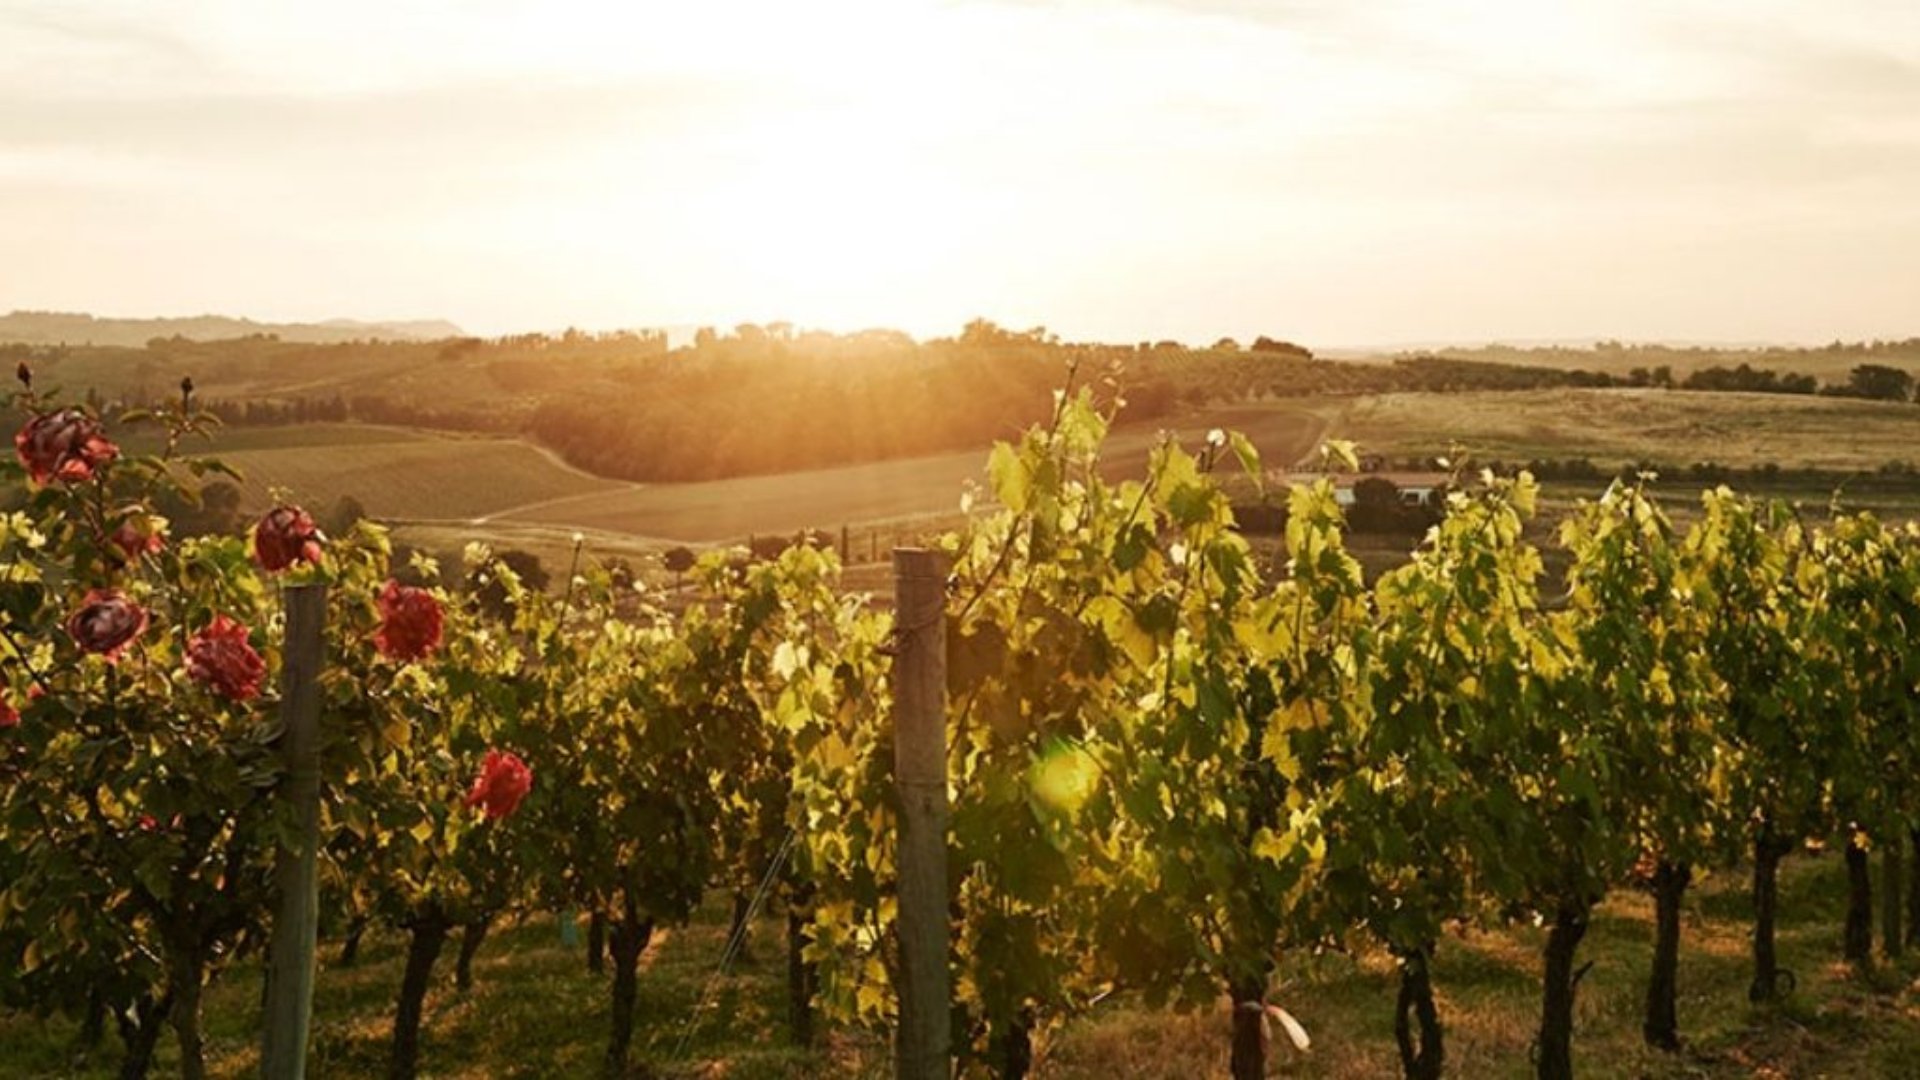 An evening by lights of the lanterns among the rows of vineyards of Vino Nobile di Montepulciano, in Valdichiana